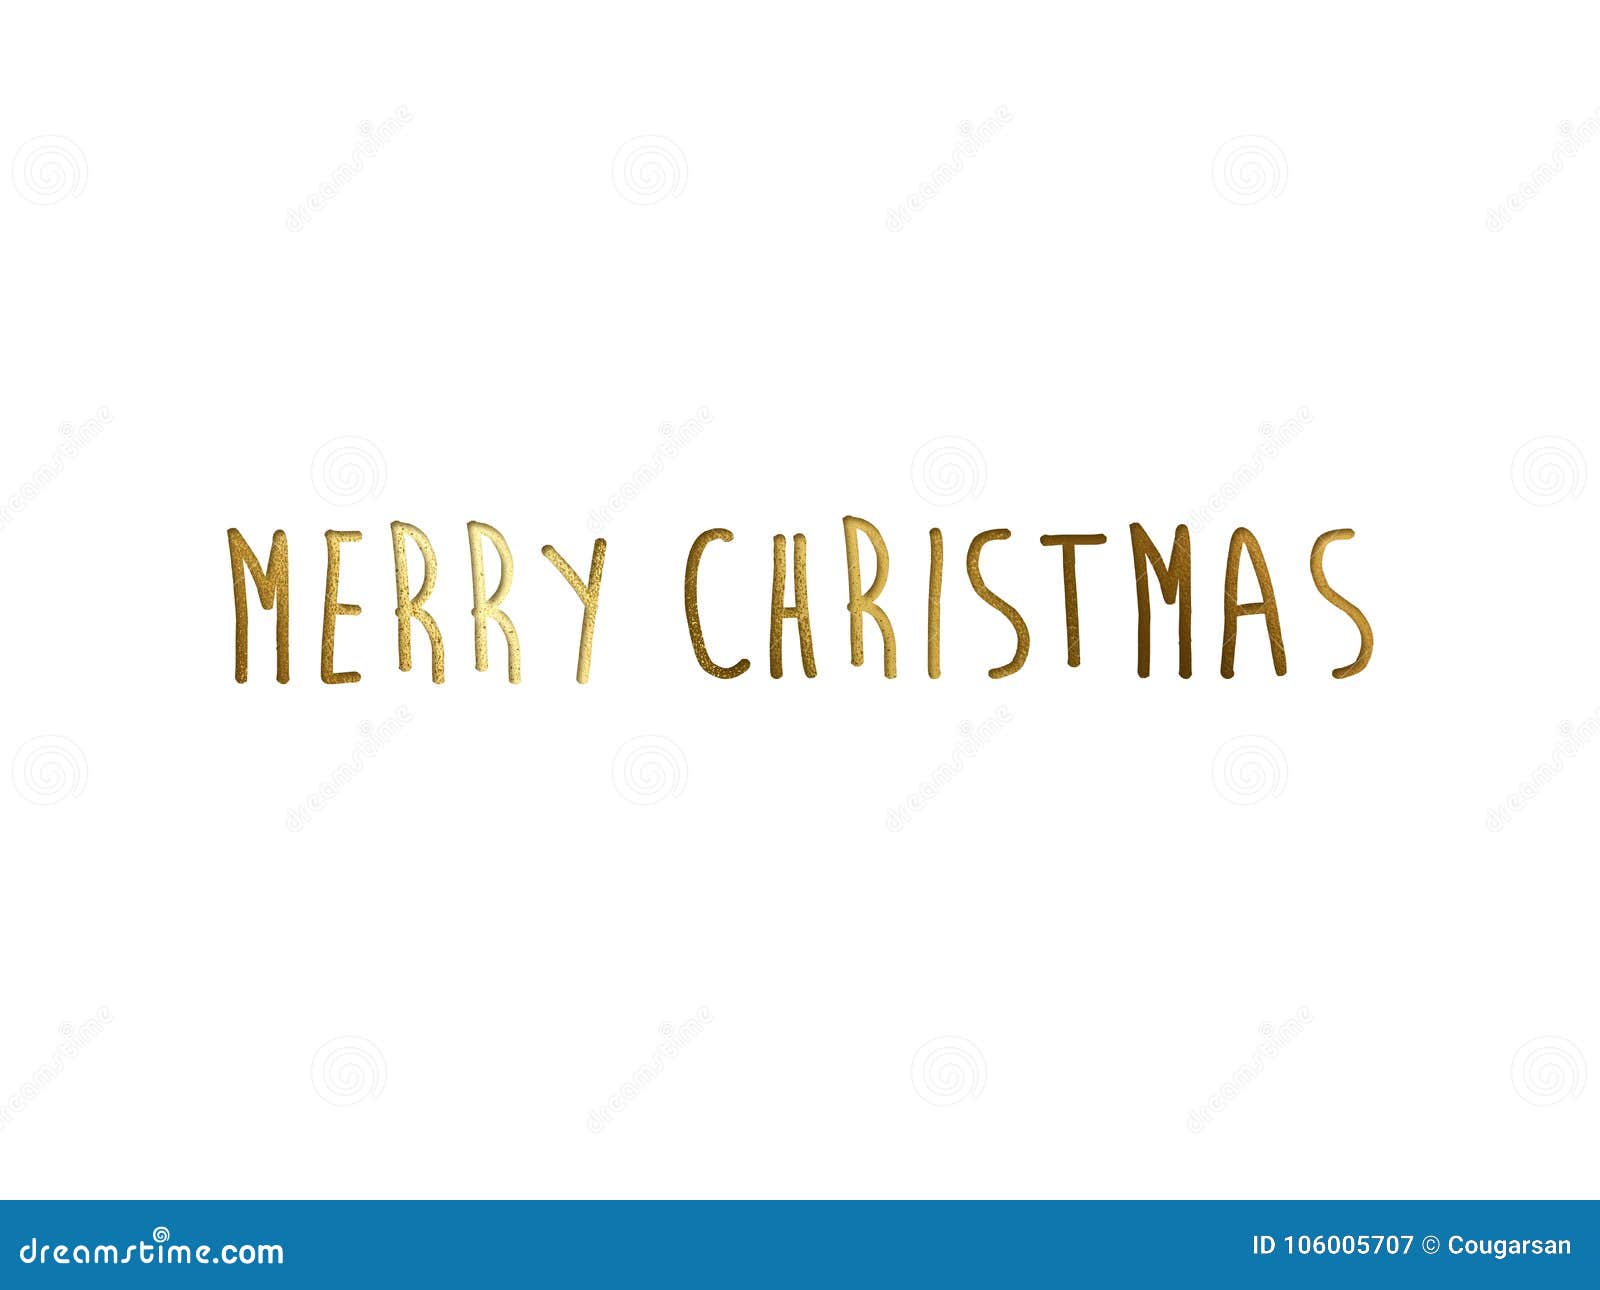 Download Gold Glitter Isolated Hand Writing Word MERRY CHRISTMAS Stock Illustration Illustration of golden